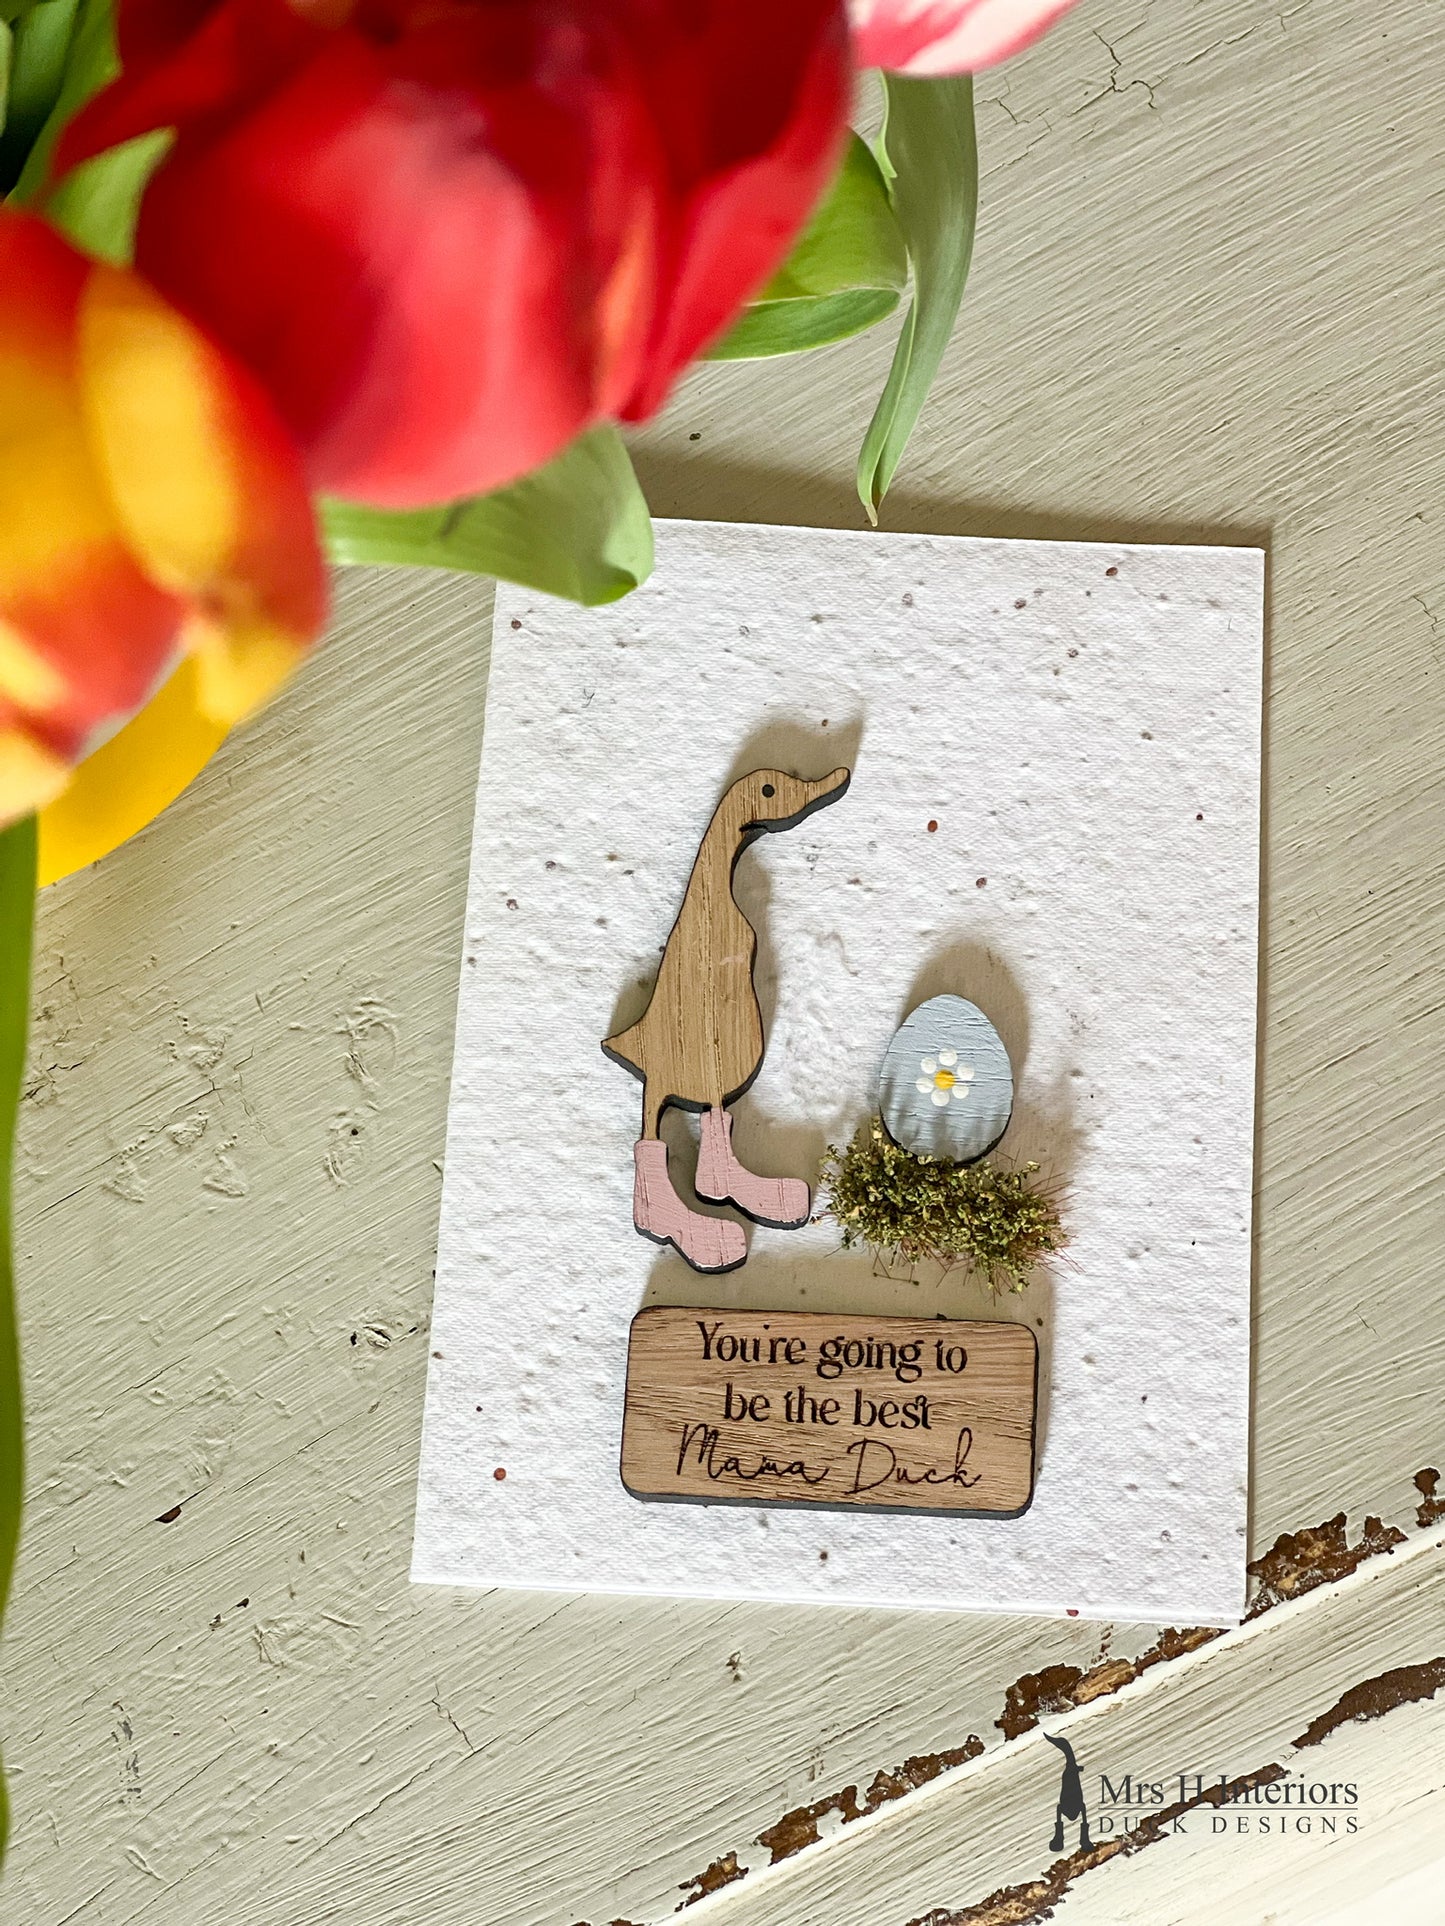 You're Going To Be The Best Mama Duck - Duck with Egg - Mother To Be Card - Decorated Wooden Duck in Boots by Mrs H the Duck Lady